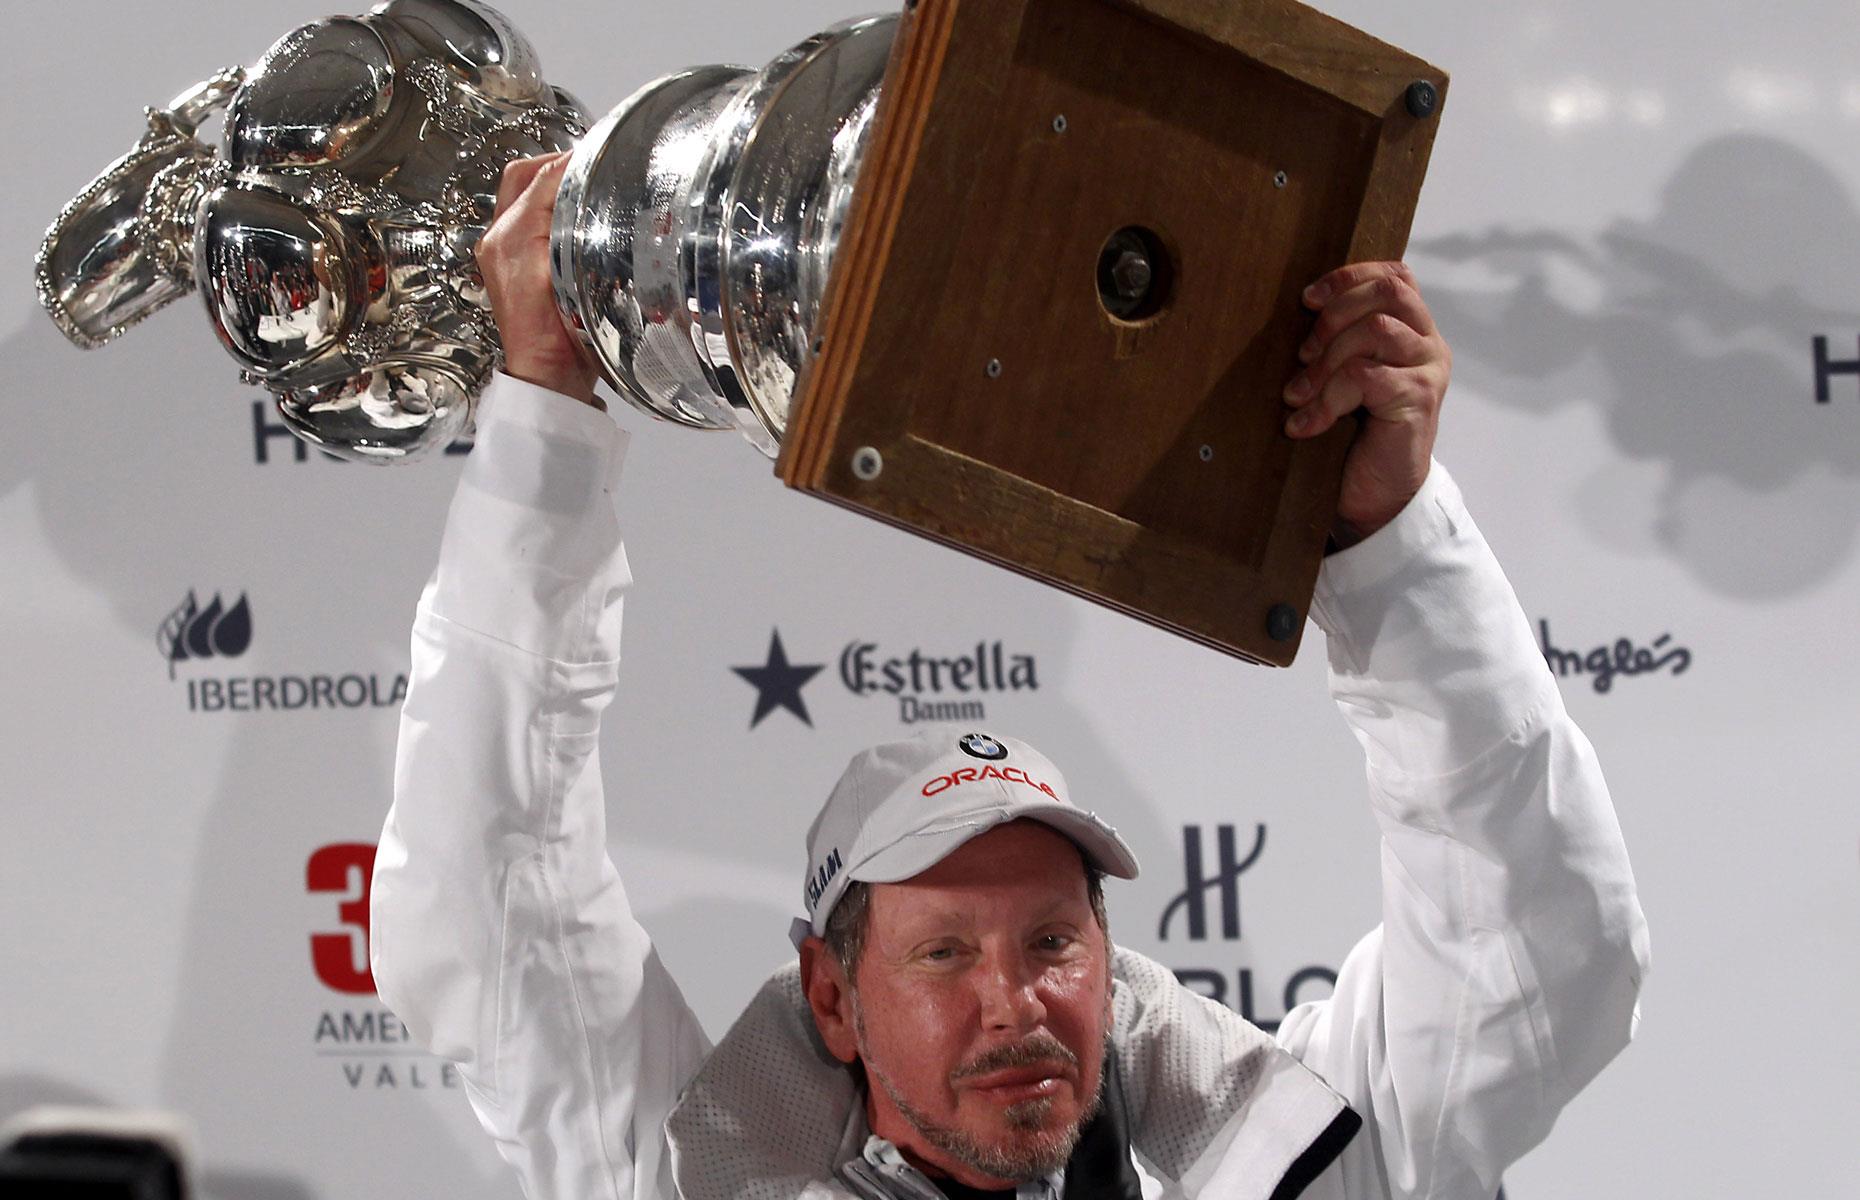 Ellison loves sailing and his Oracle Team USA won the America's Cup in 2013